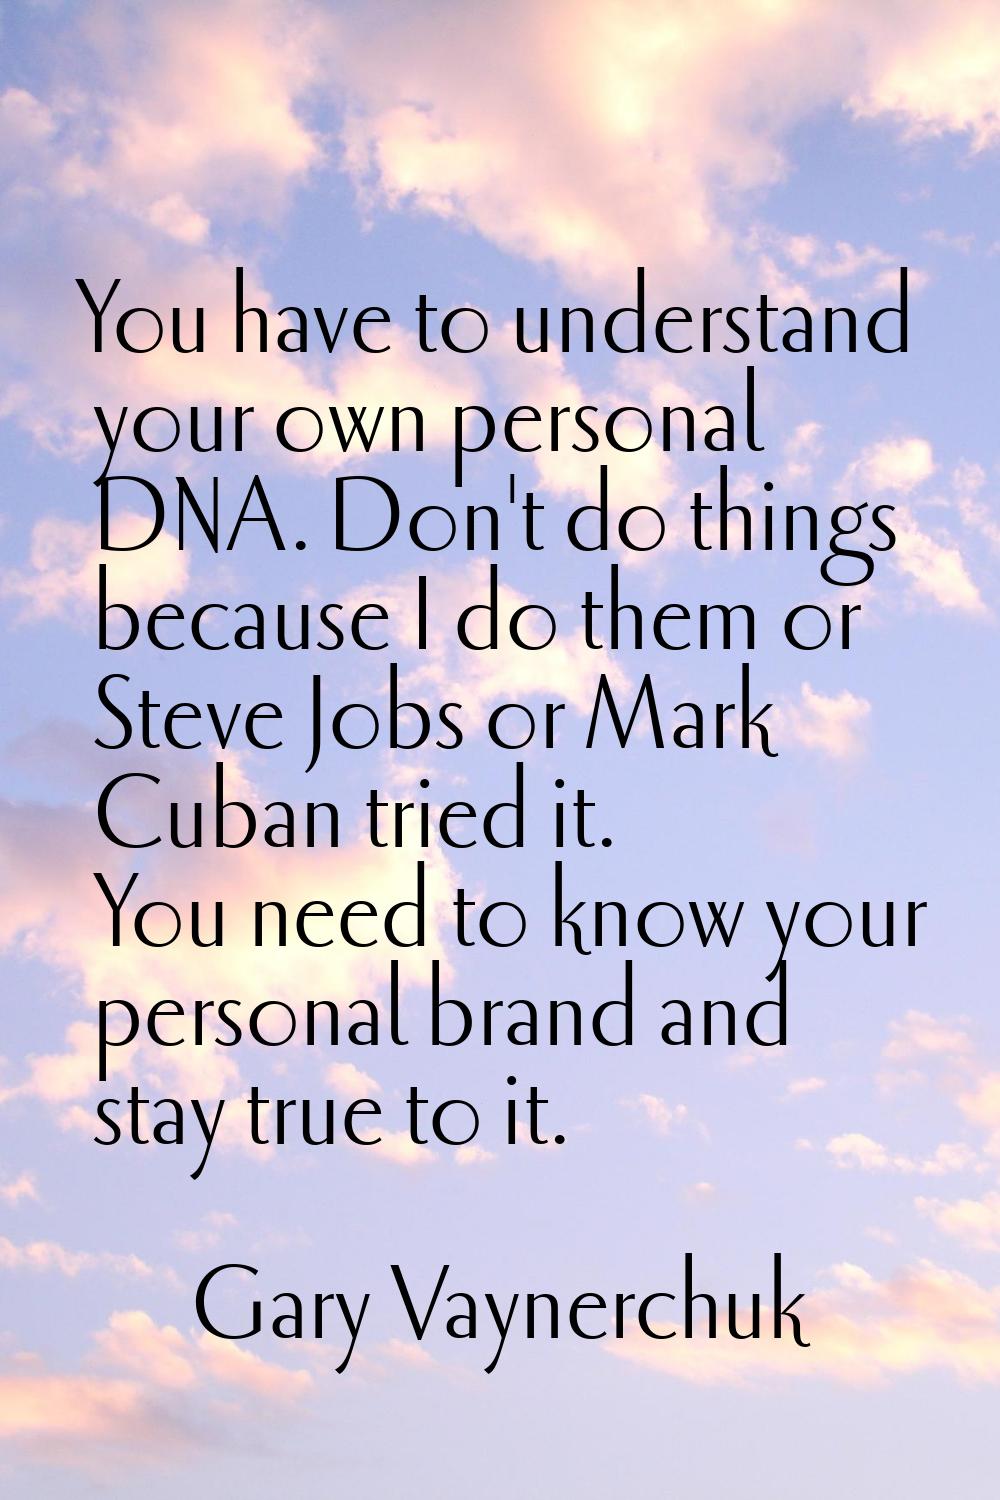 You have to understand your own personal DNA. Don't do things because I do them or Steve Jobs or Ma